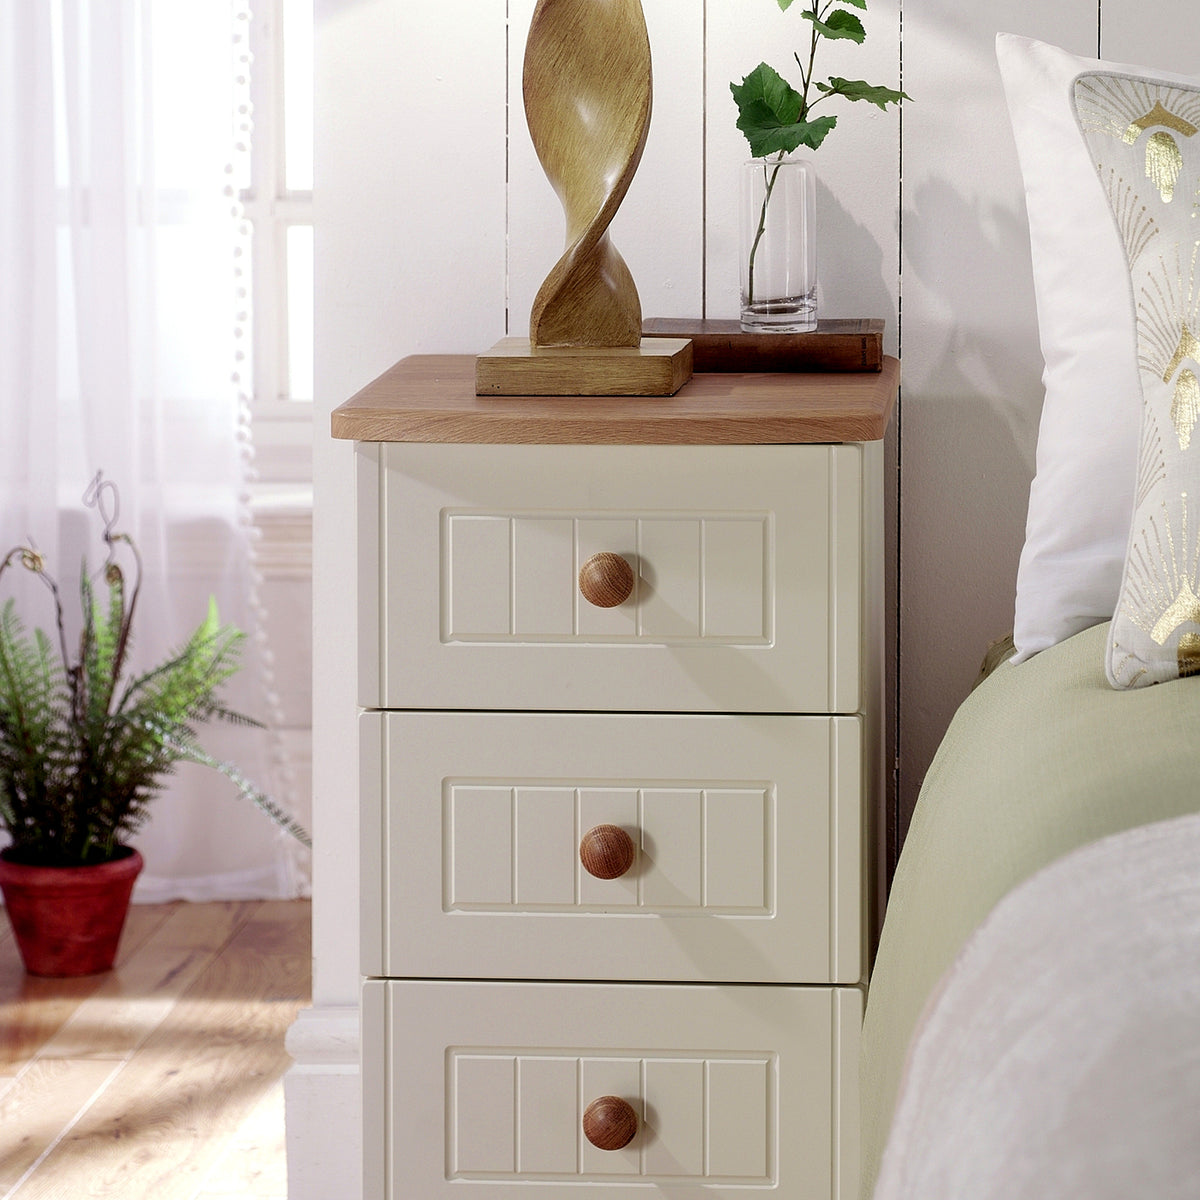 Brixham Cream Wireless Charging 3 Drawer Bedside from Roseland